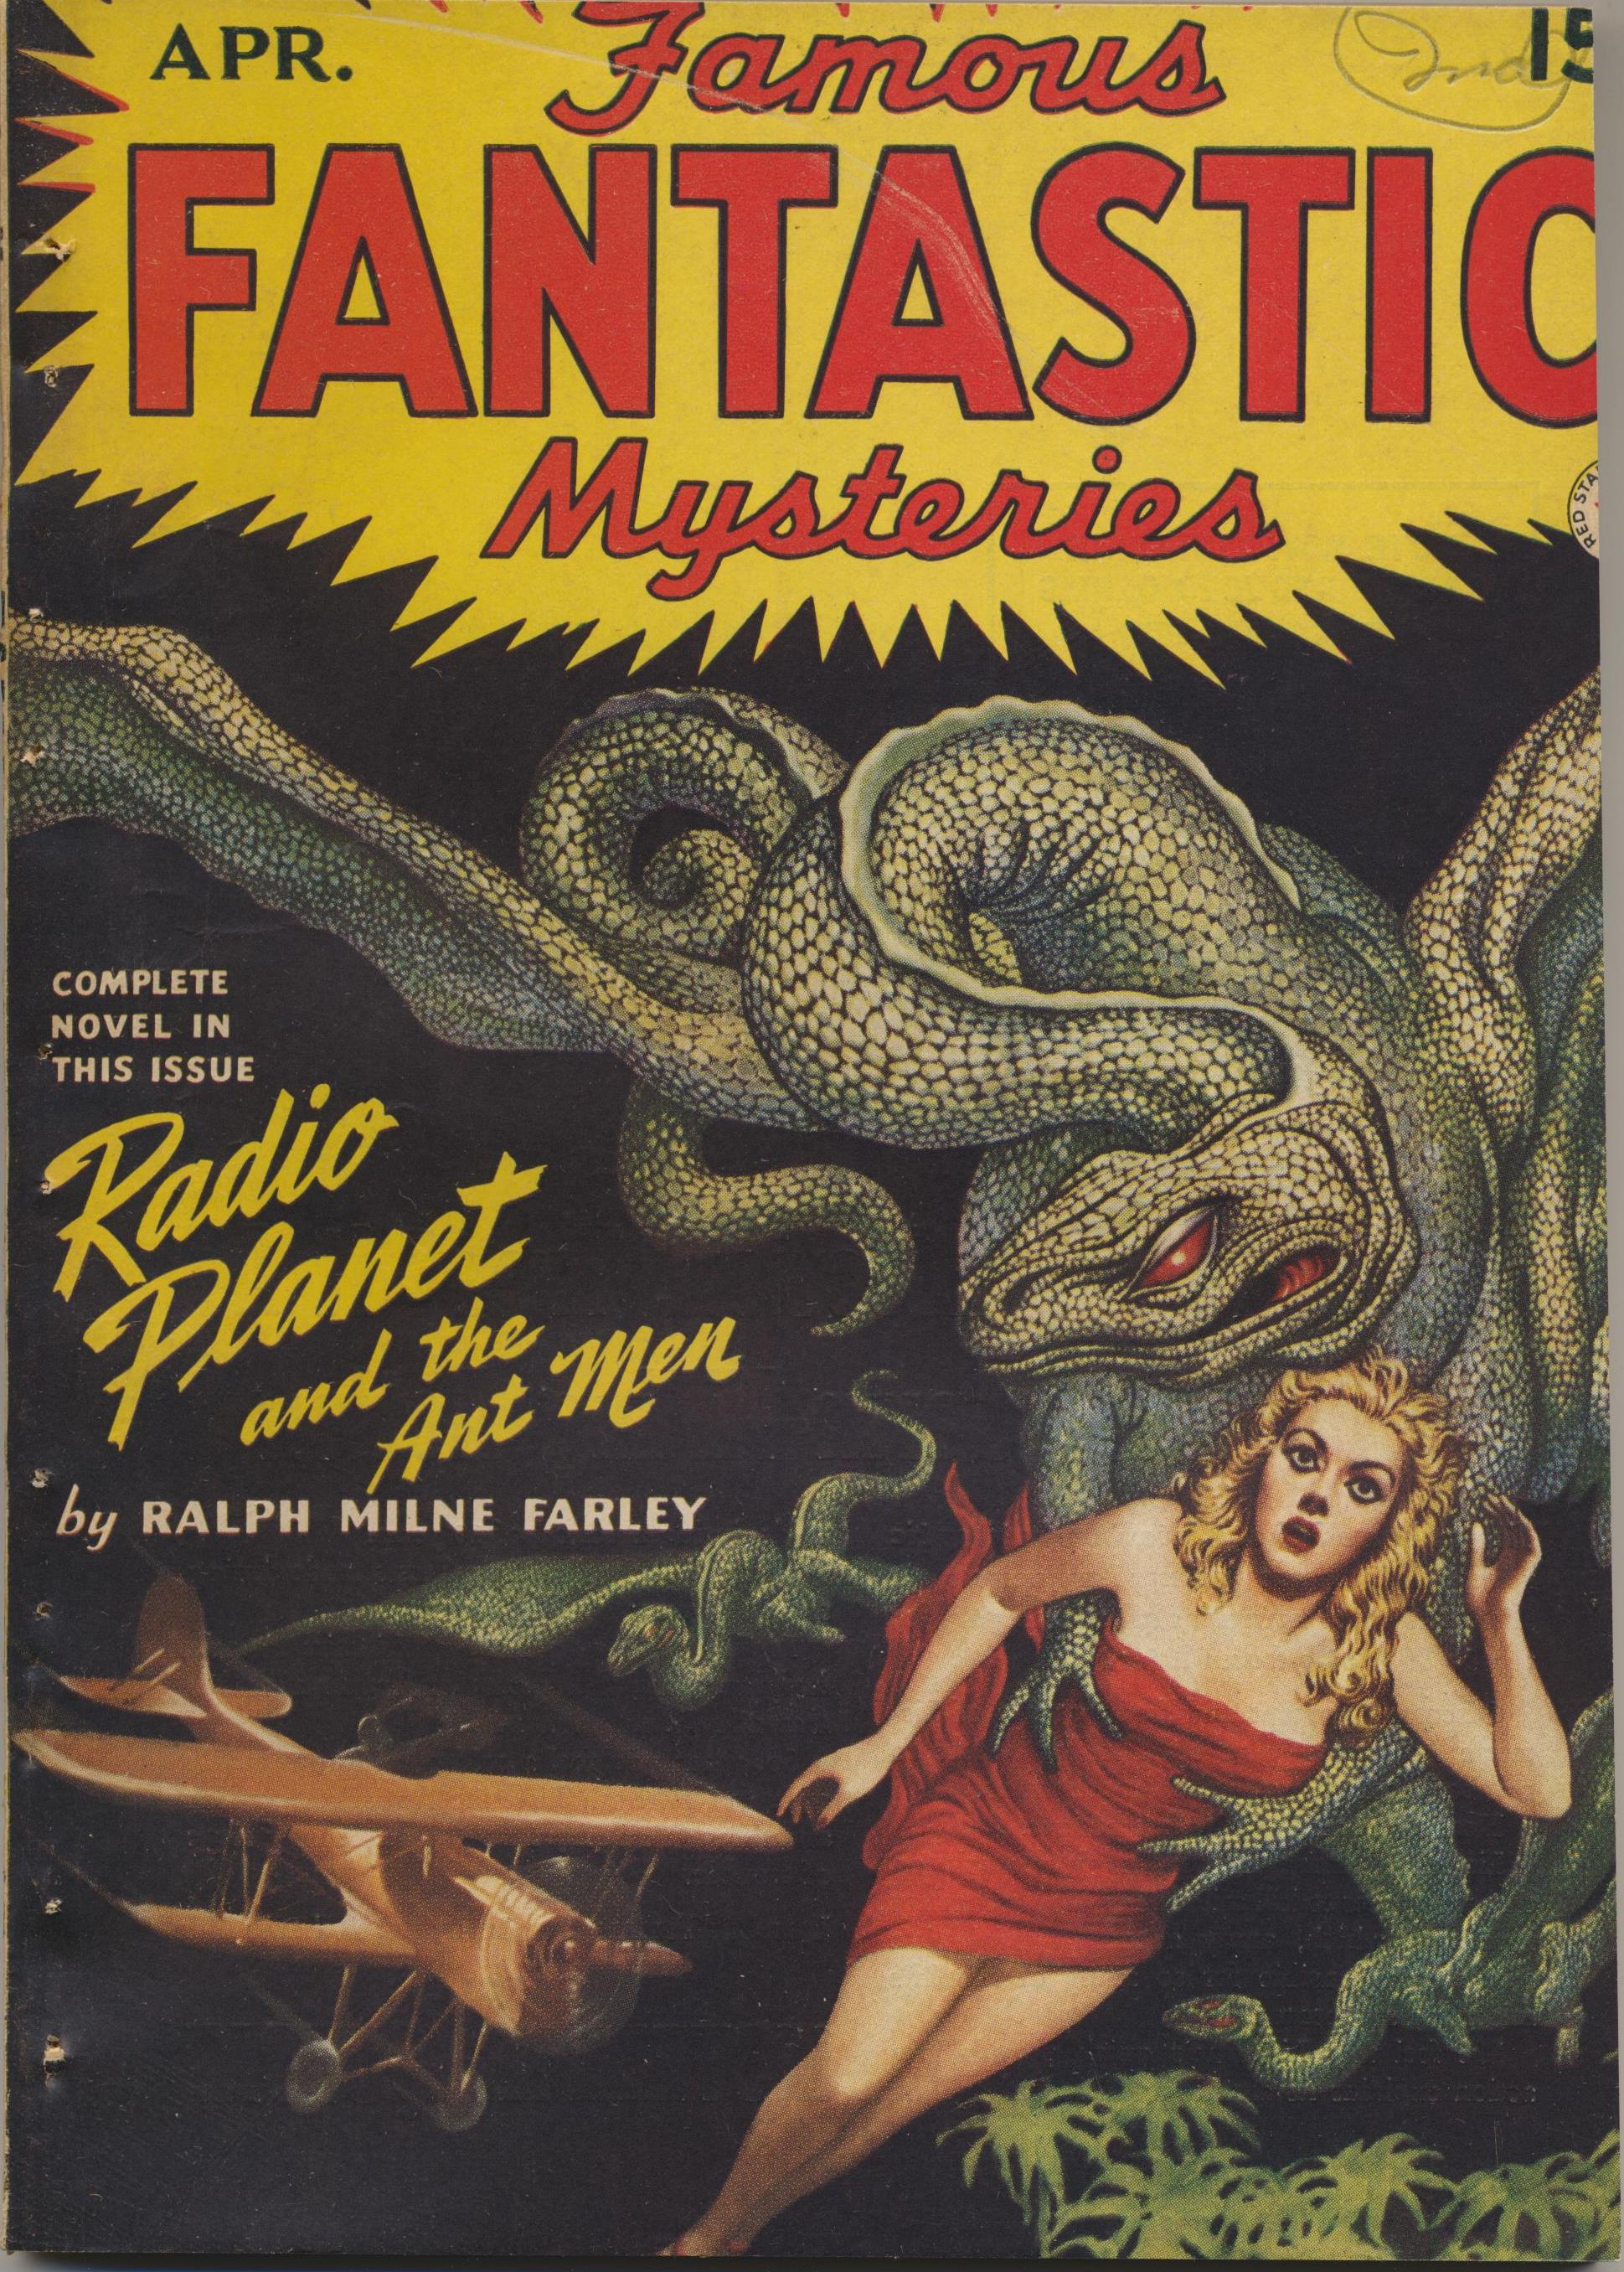 Images of Famous Fantastic Mysteries | 1939x2712